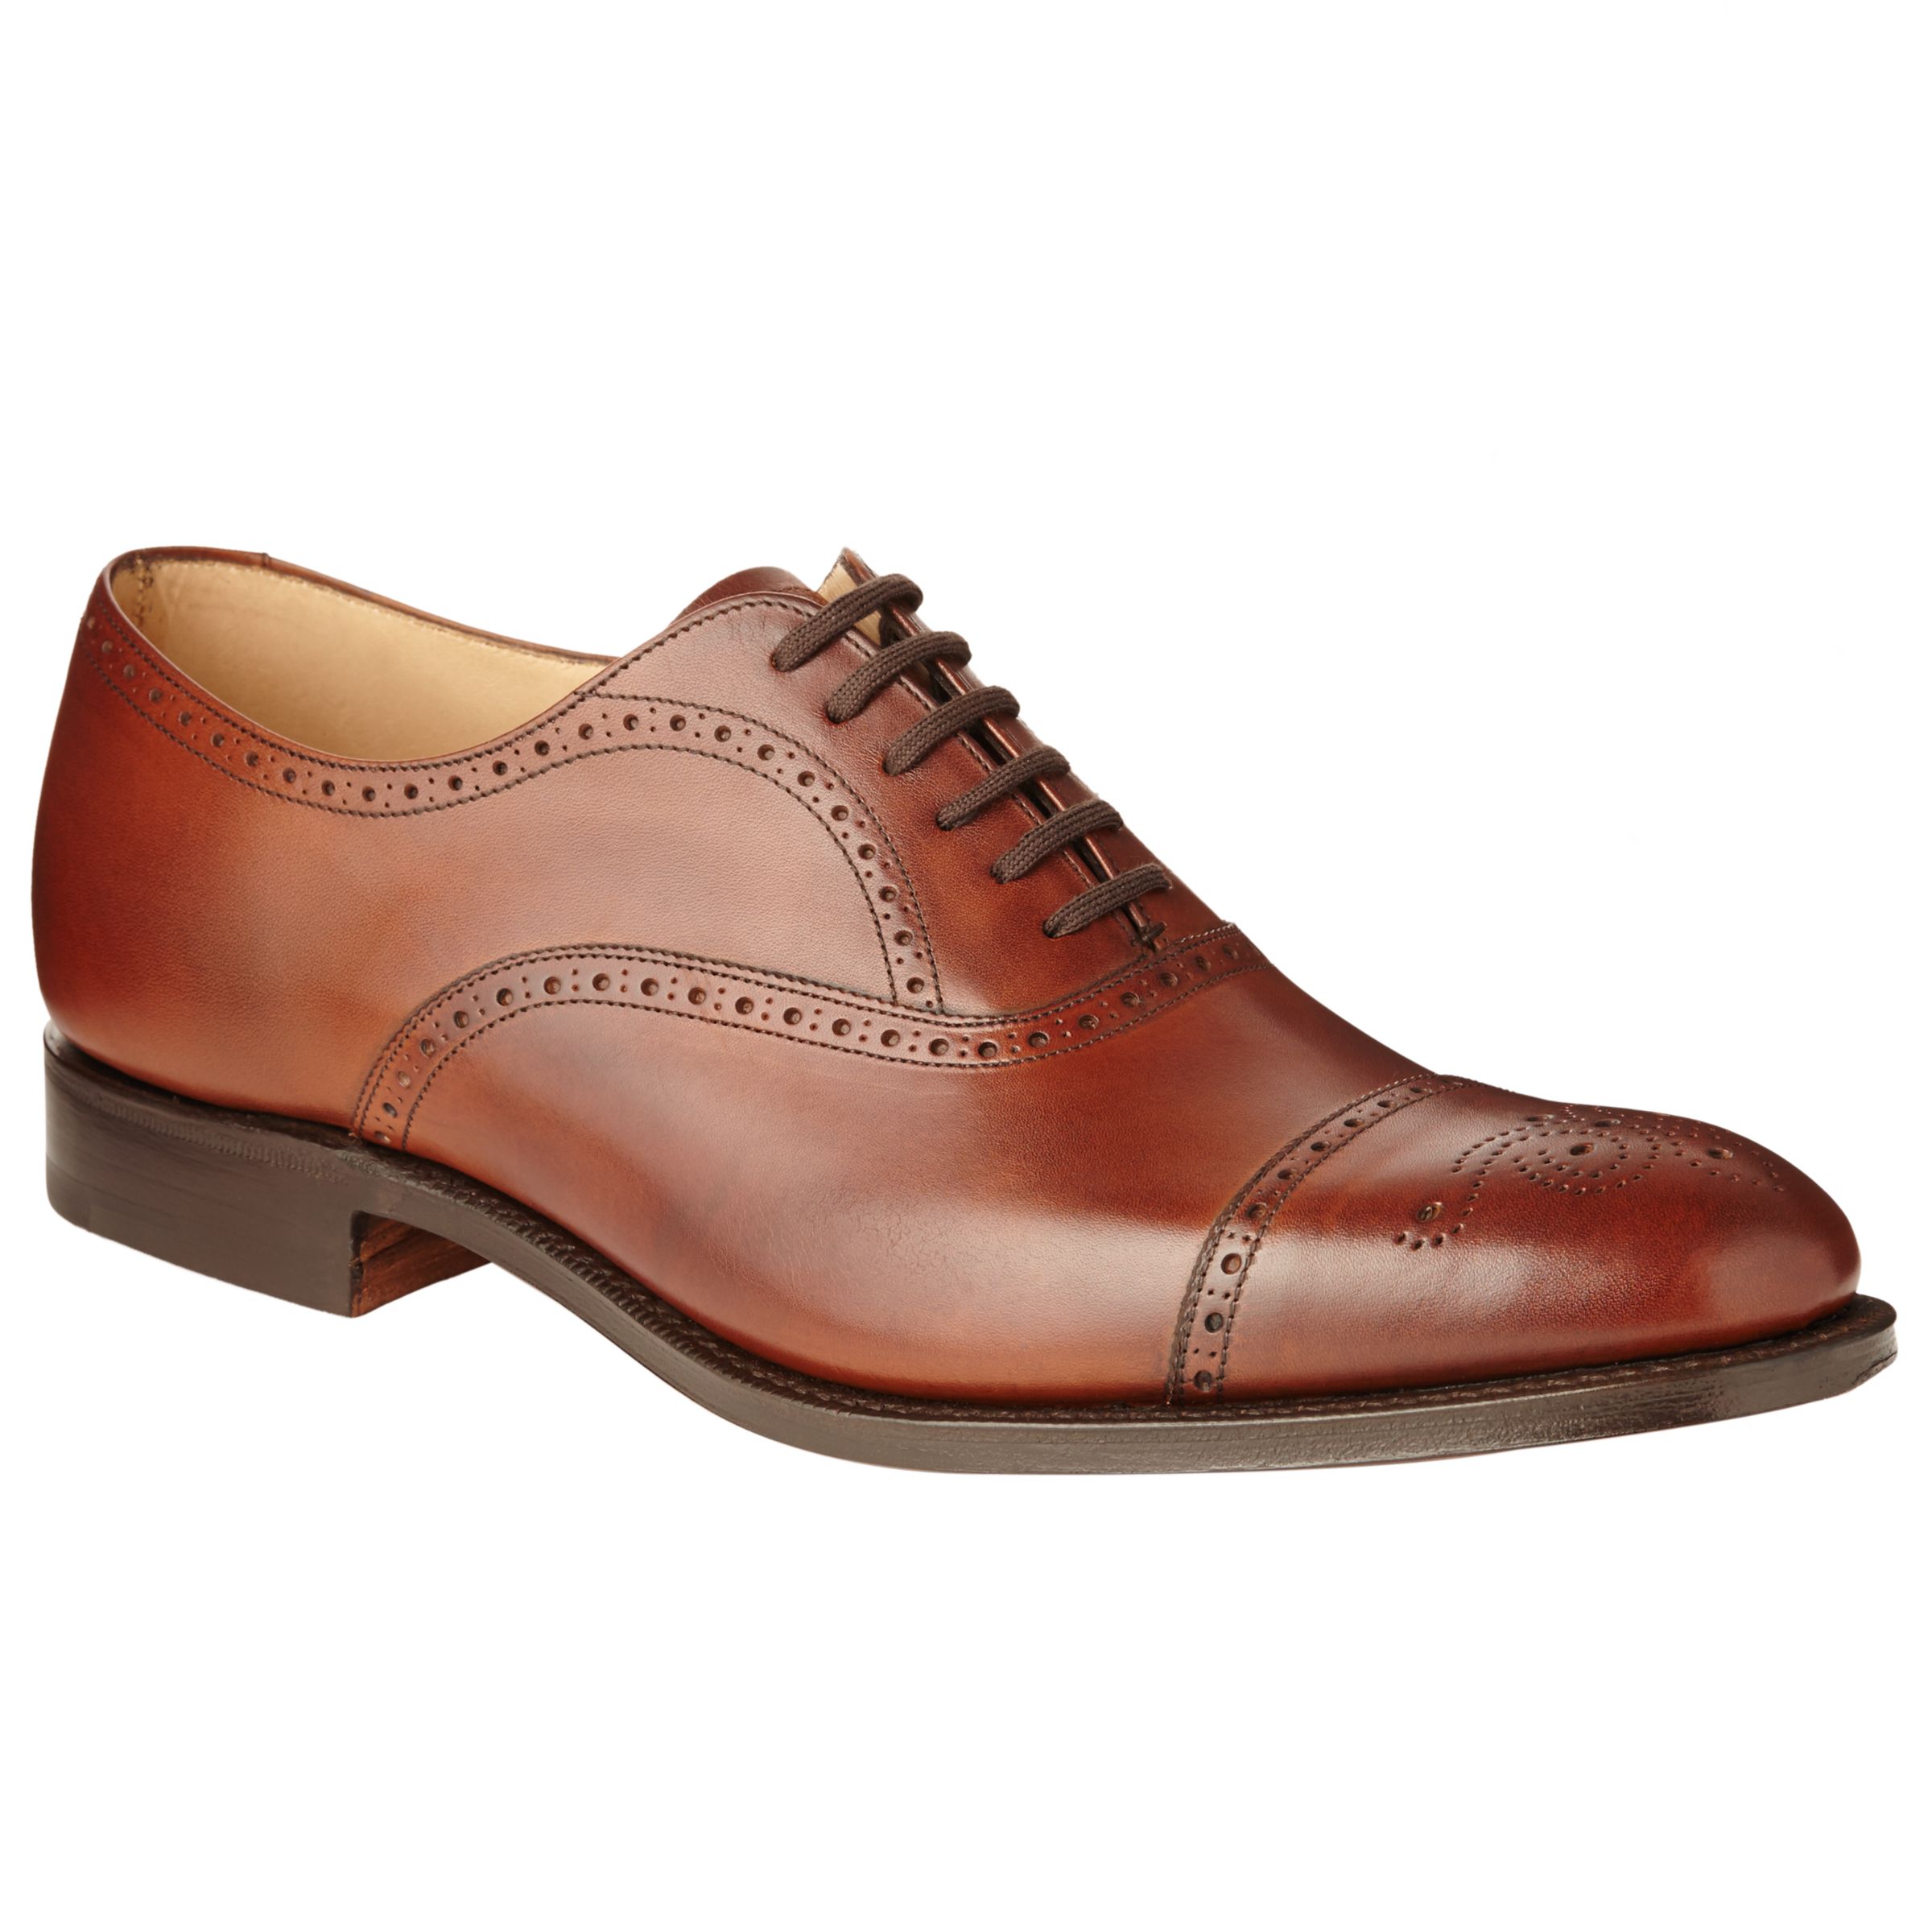 Buy Church's Toronto Leather Semi Brogue Oxford Shoes Online at ...